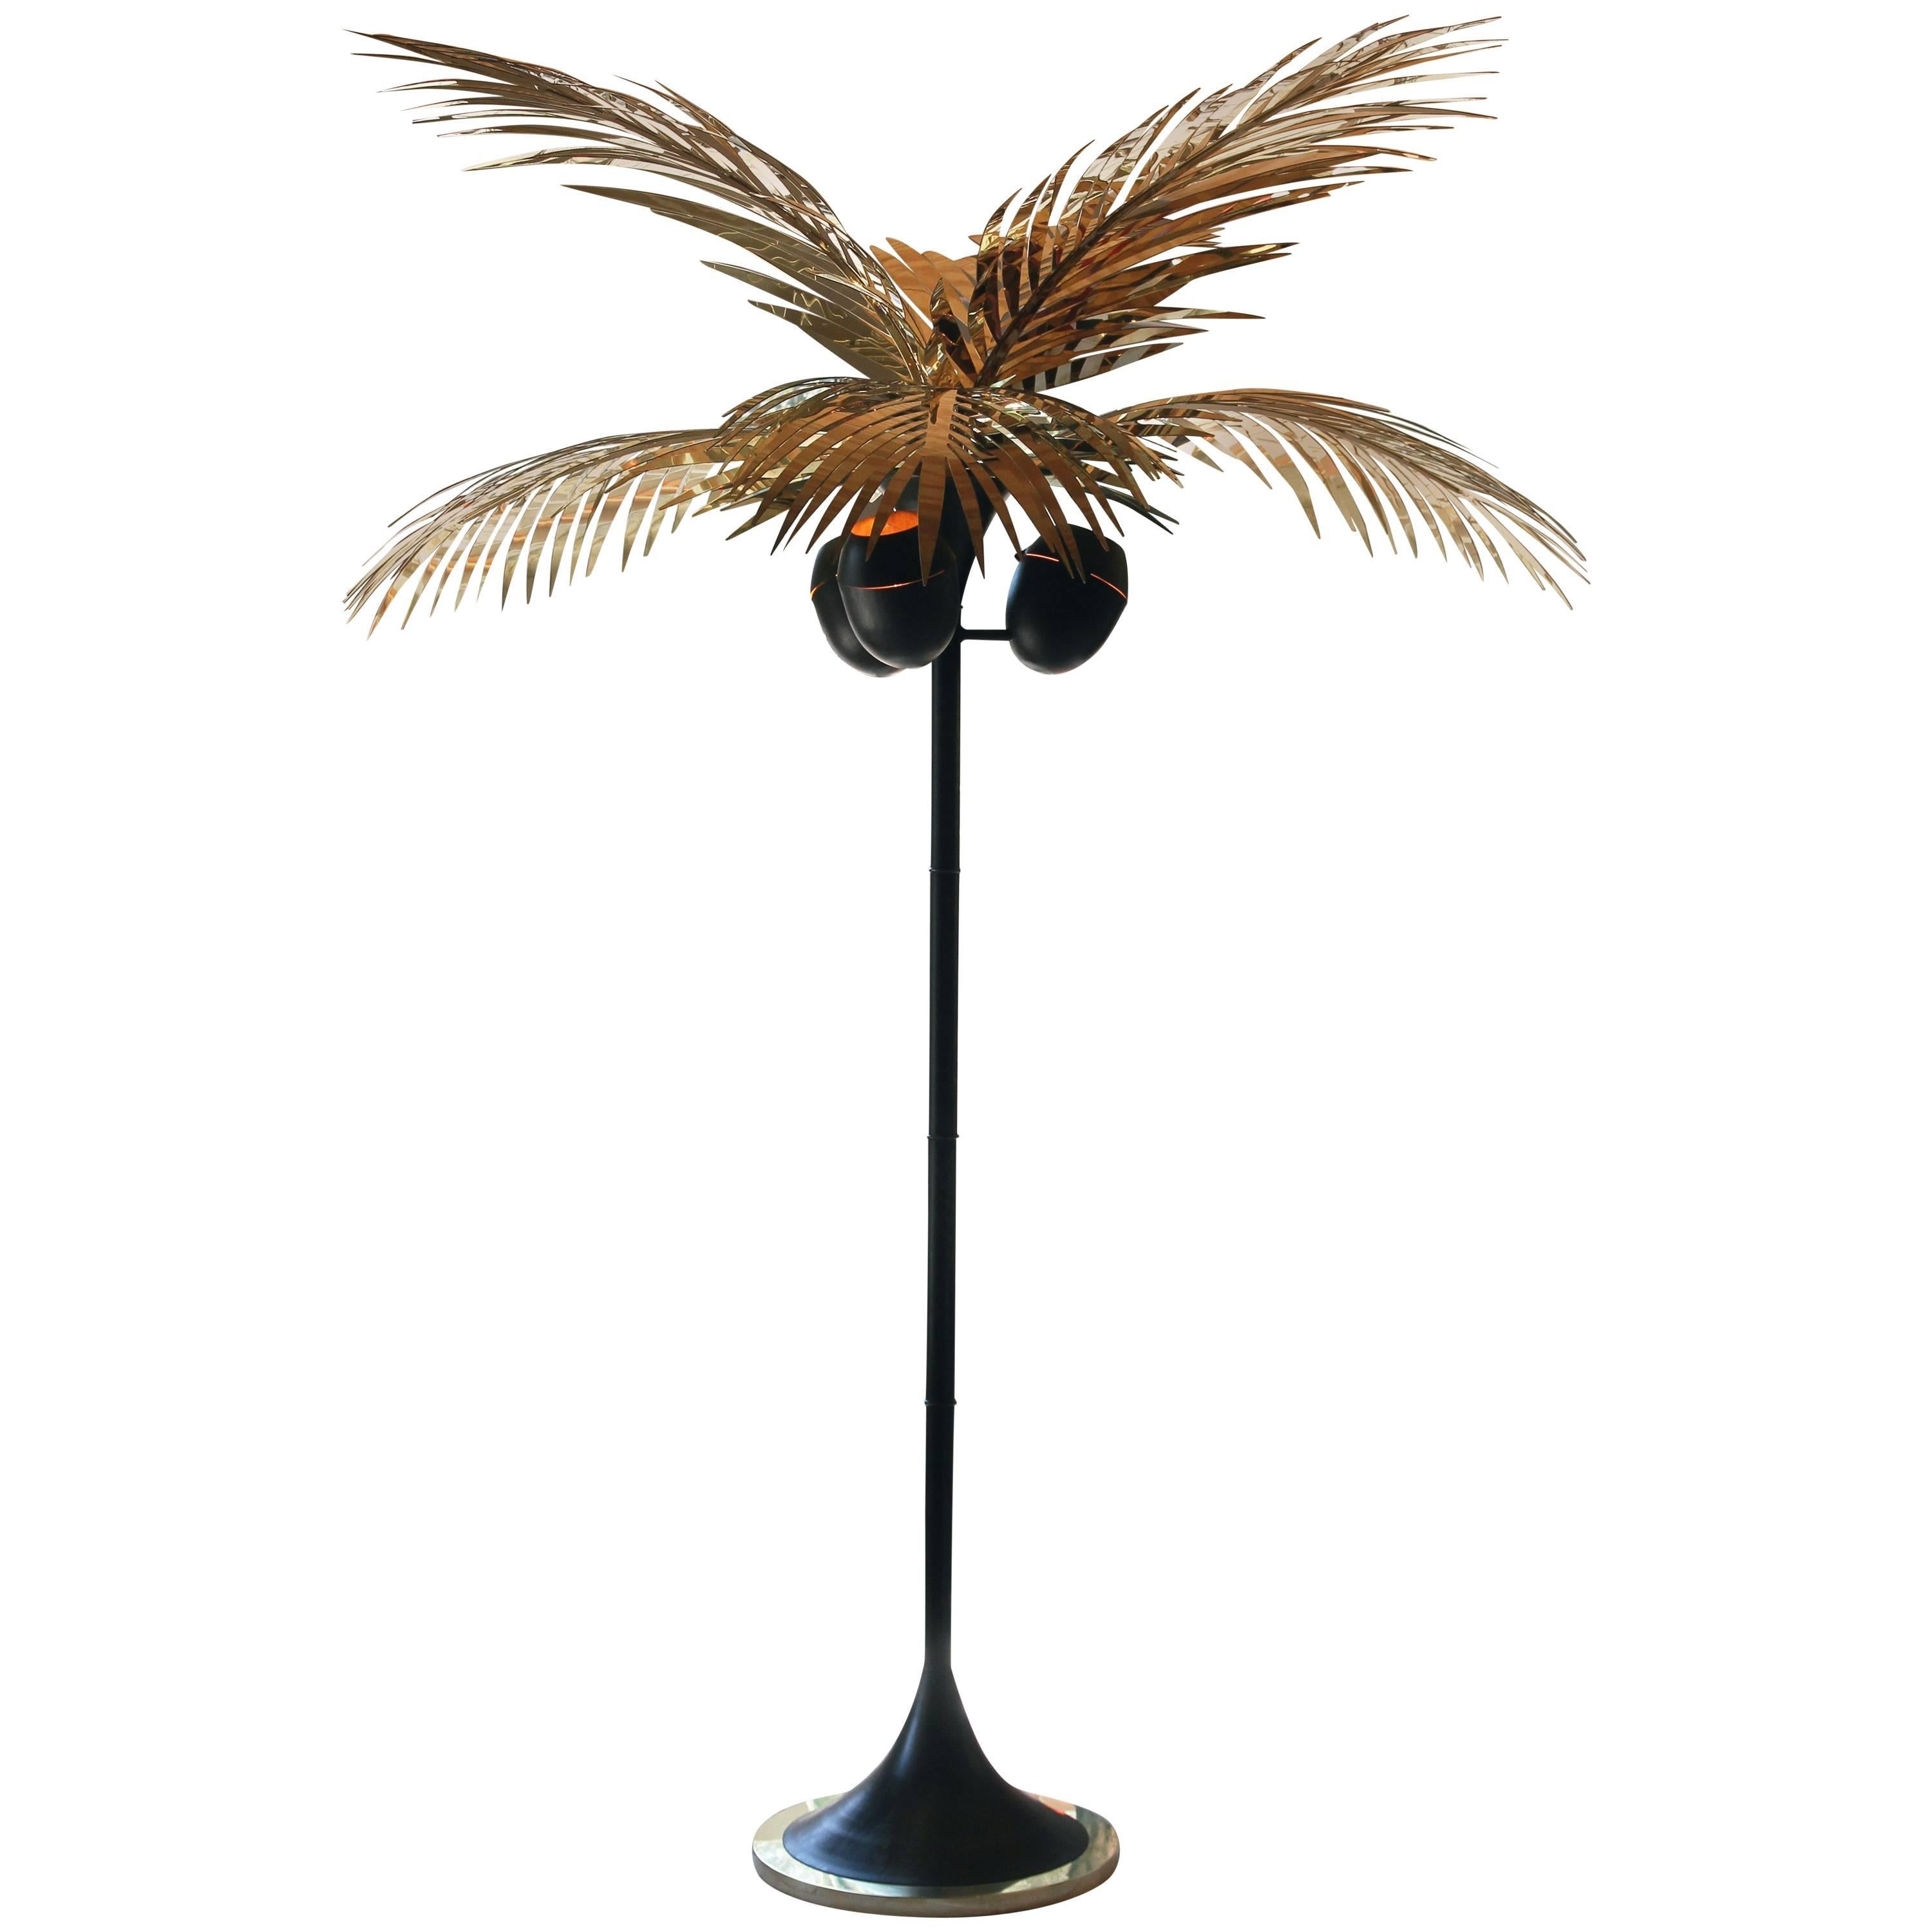 California King Palm Tree Floor Lamp in Polished Brass by Christopher Kreiling For Sale